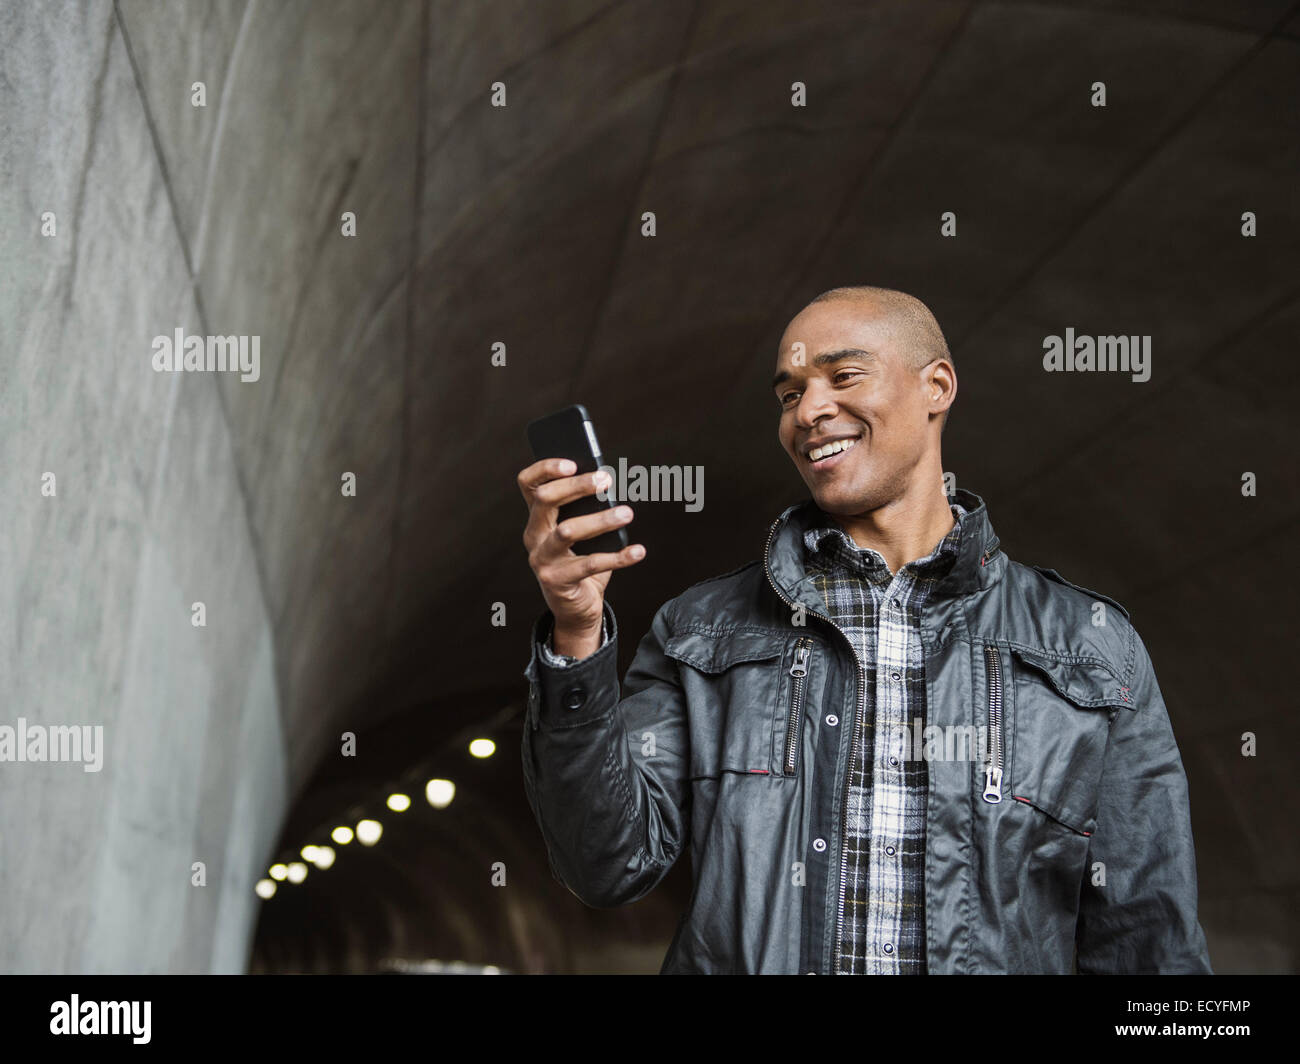 Black man using cell phone in tunnel urbain Banque D'Images